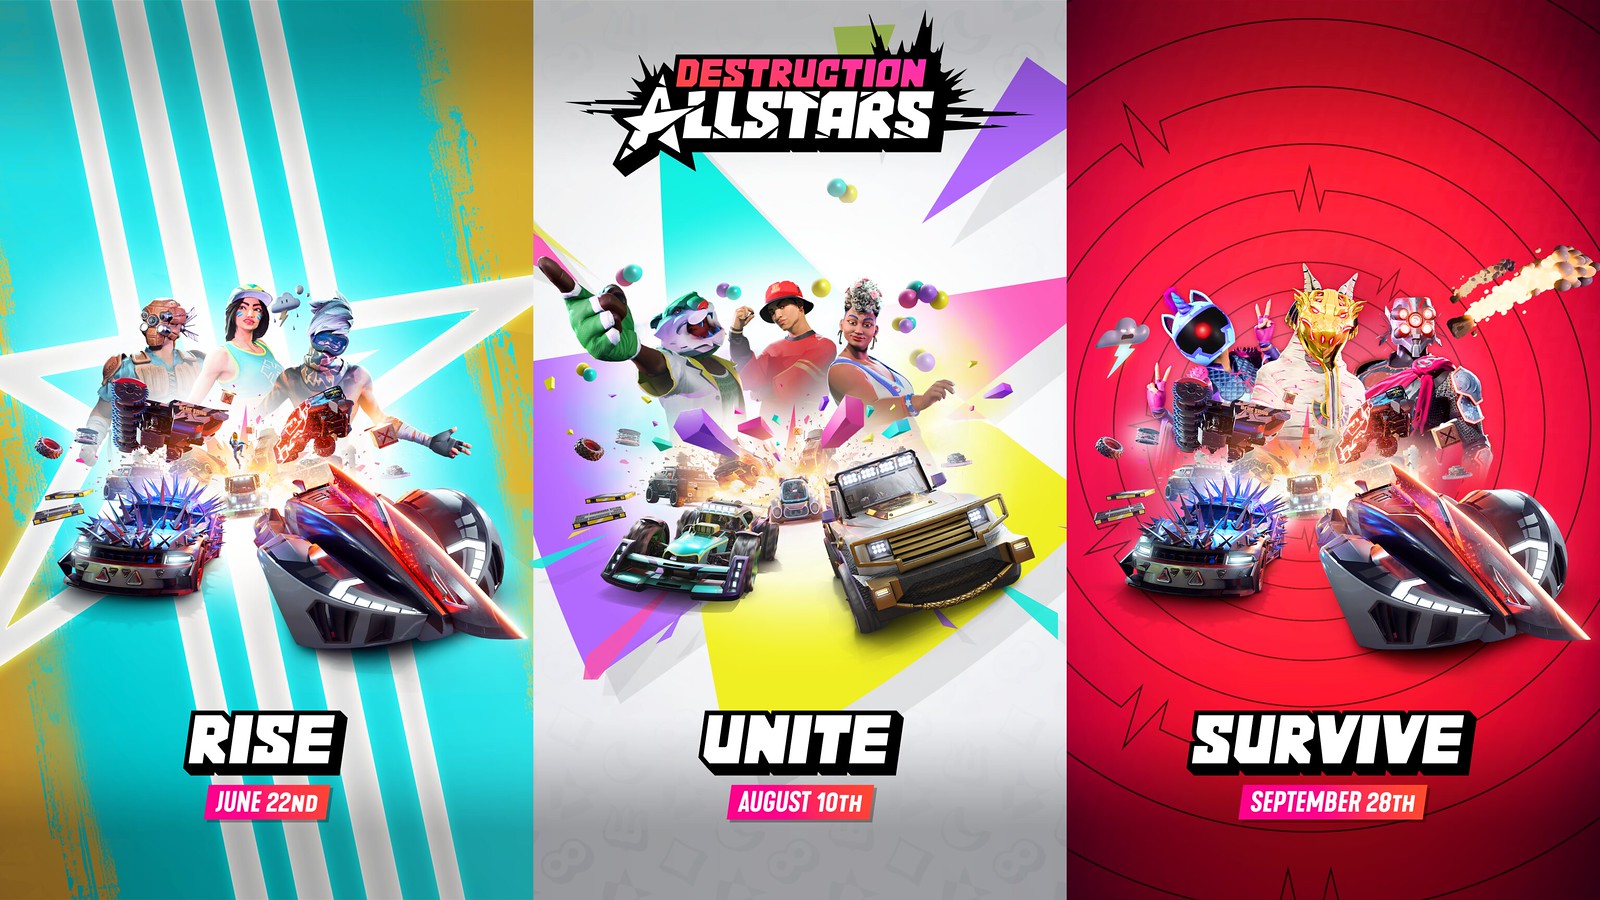 GamerCityNews 52148840058_a8655f83f9_h Destruction AllStars announces new game mode and events for PS Plus service – PlayStation.Blog 